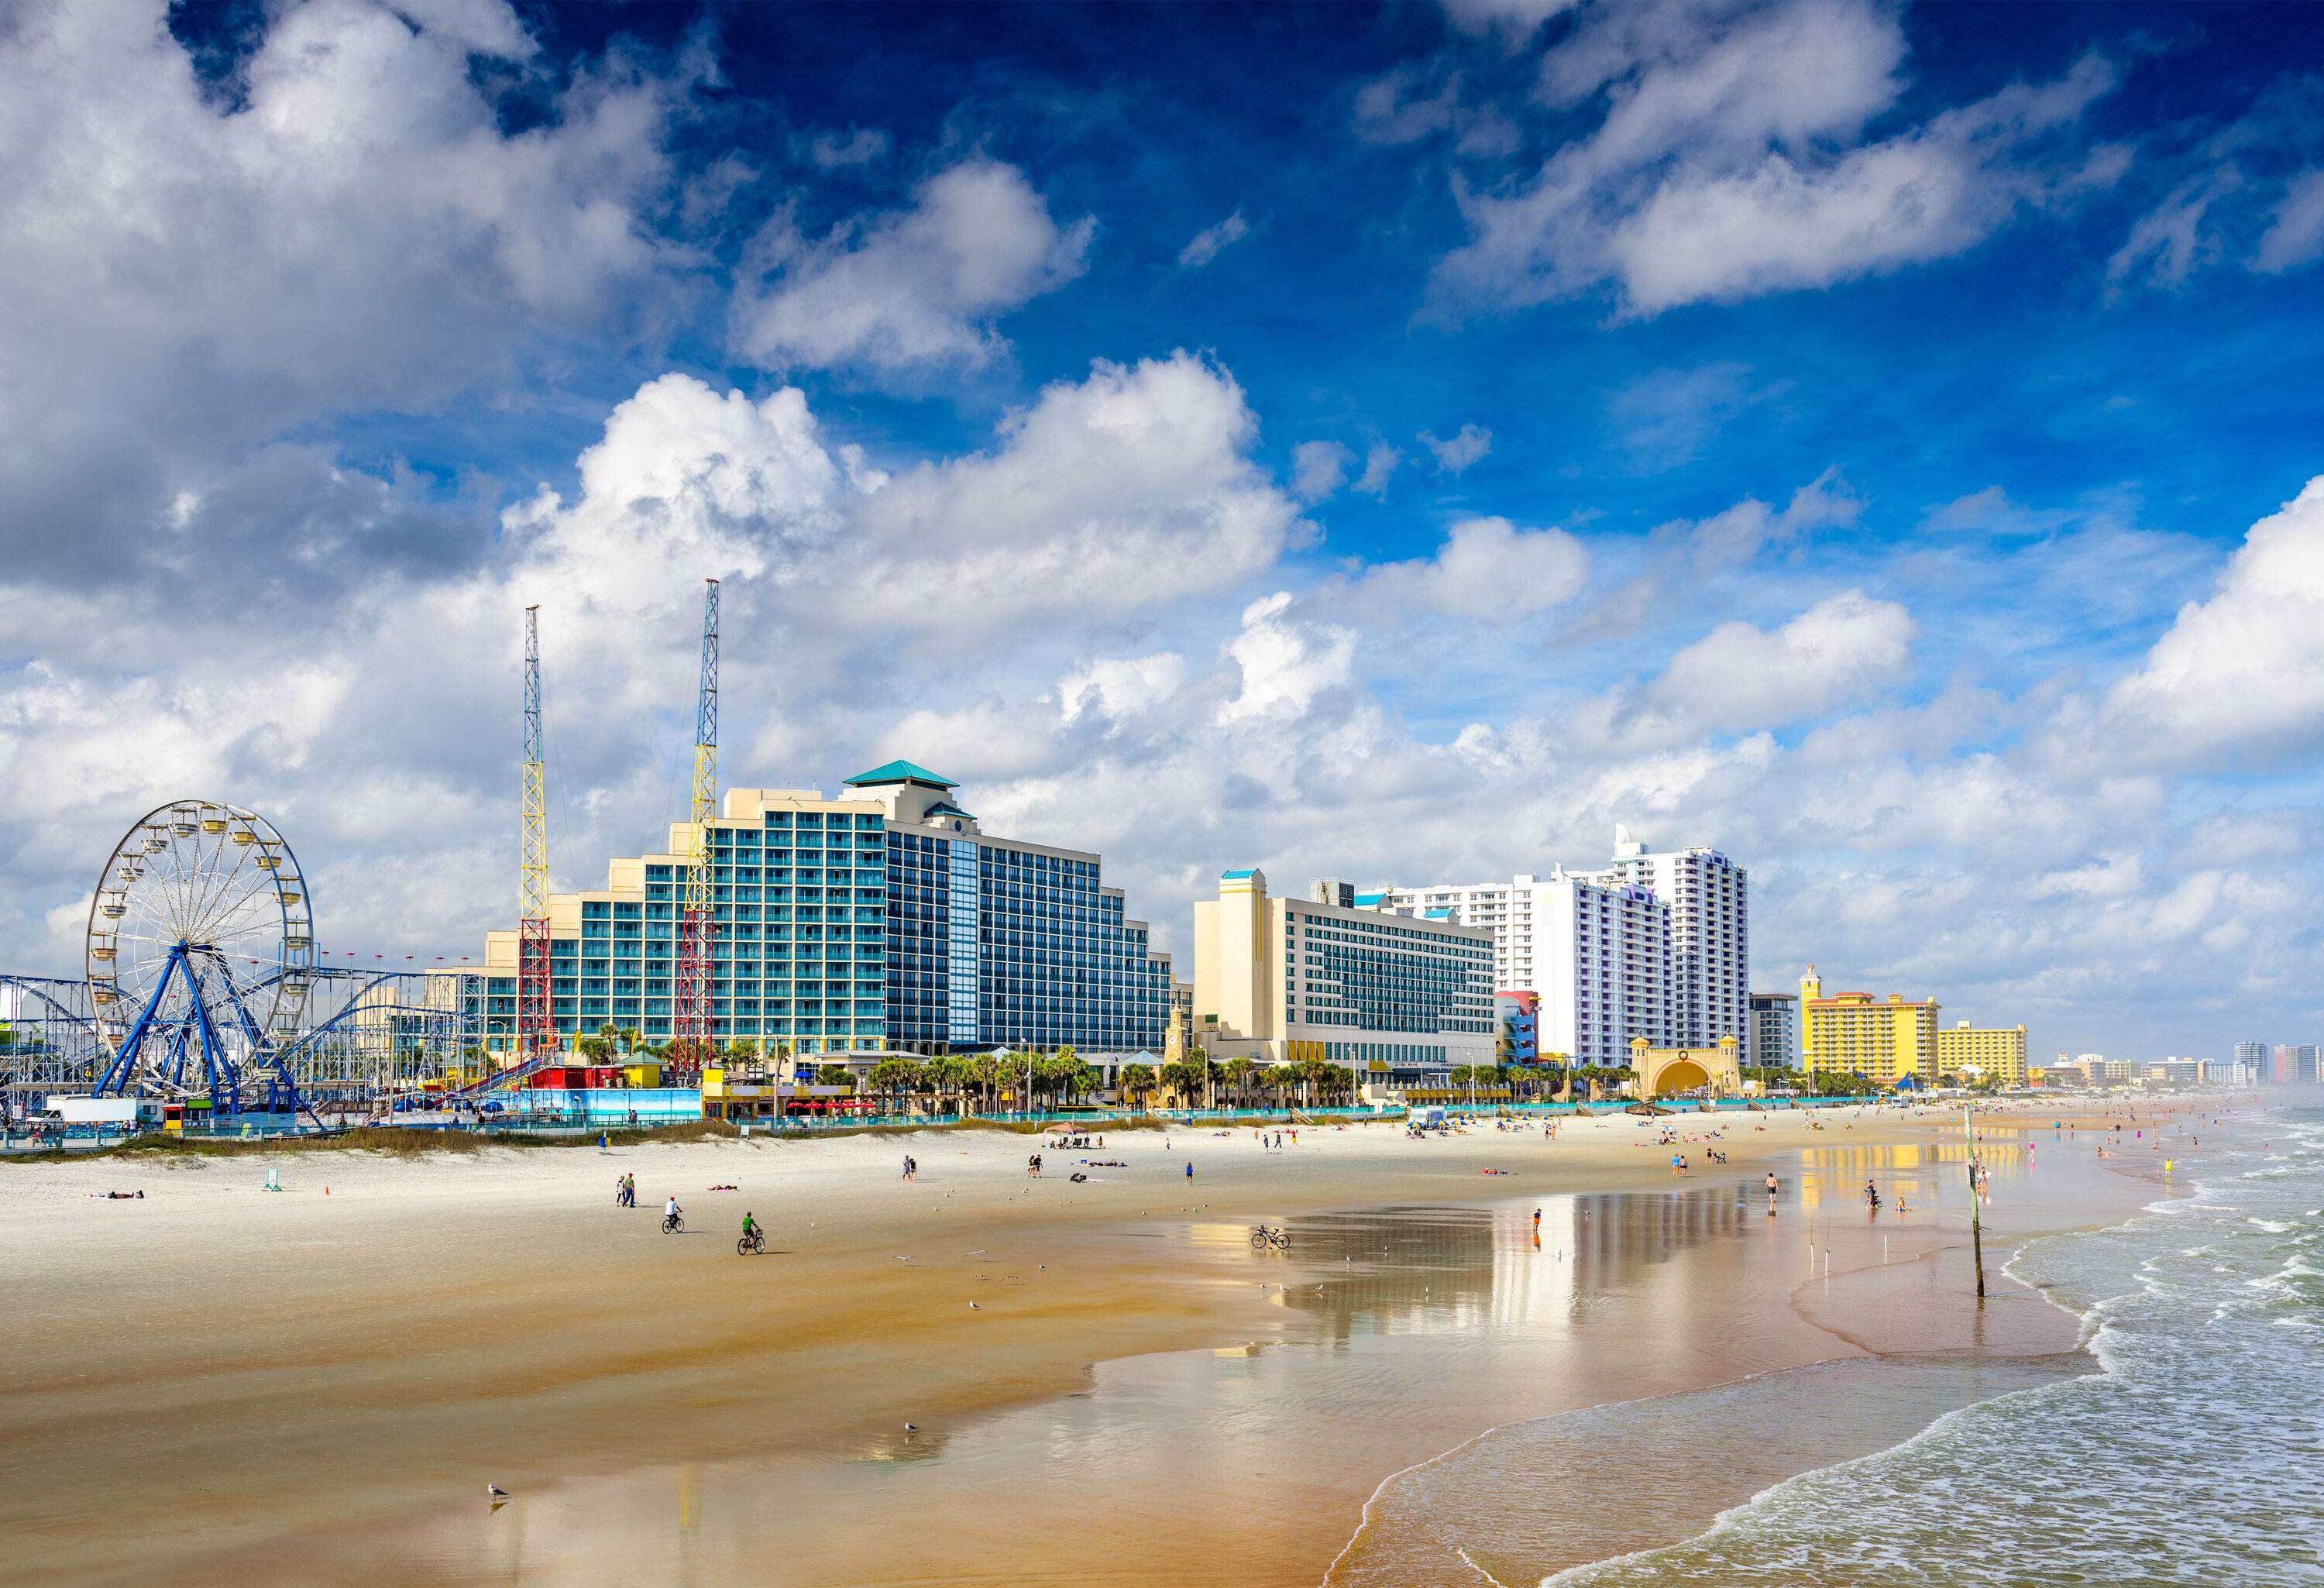 The beachfront skyline of Daytona Beach stretches along the beautiful coastline, showcasing a vibrant cityscape against the backdrop of the sparkling ocean.